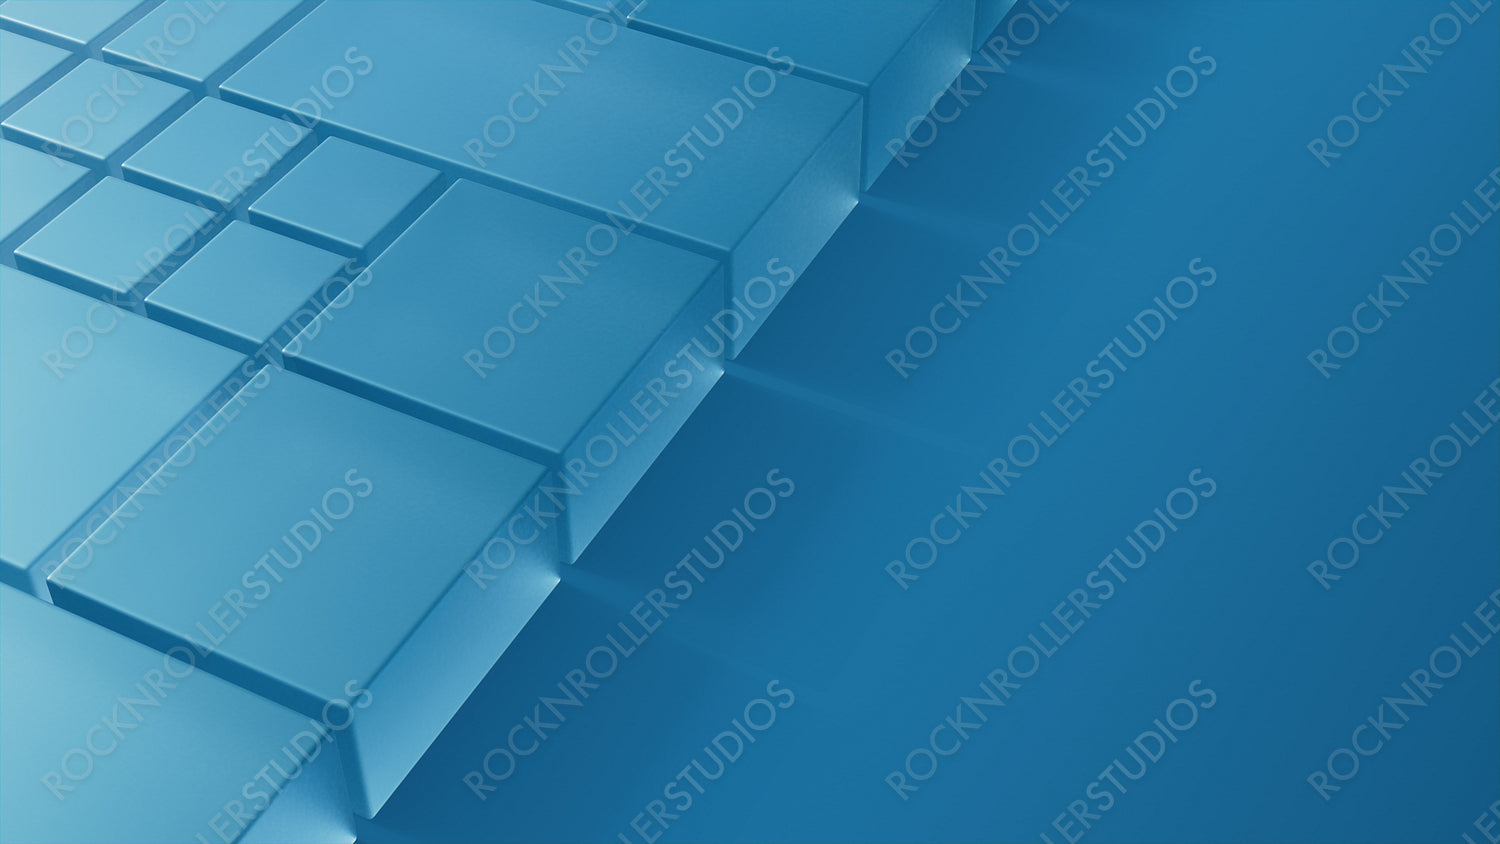 Translucent Blocks on a Blue Surface. Visionary Tech Design with copy space. 3D Render.